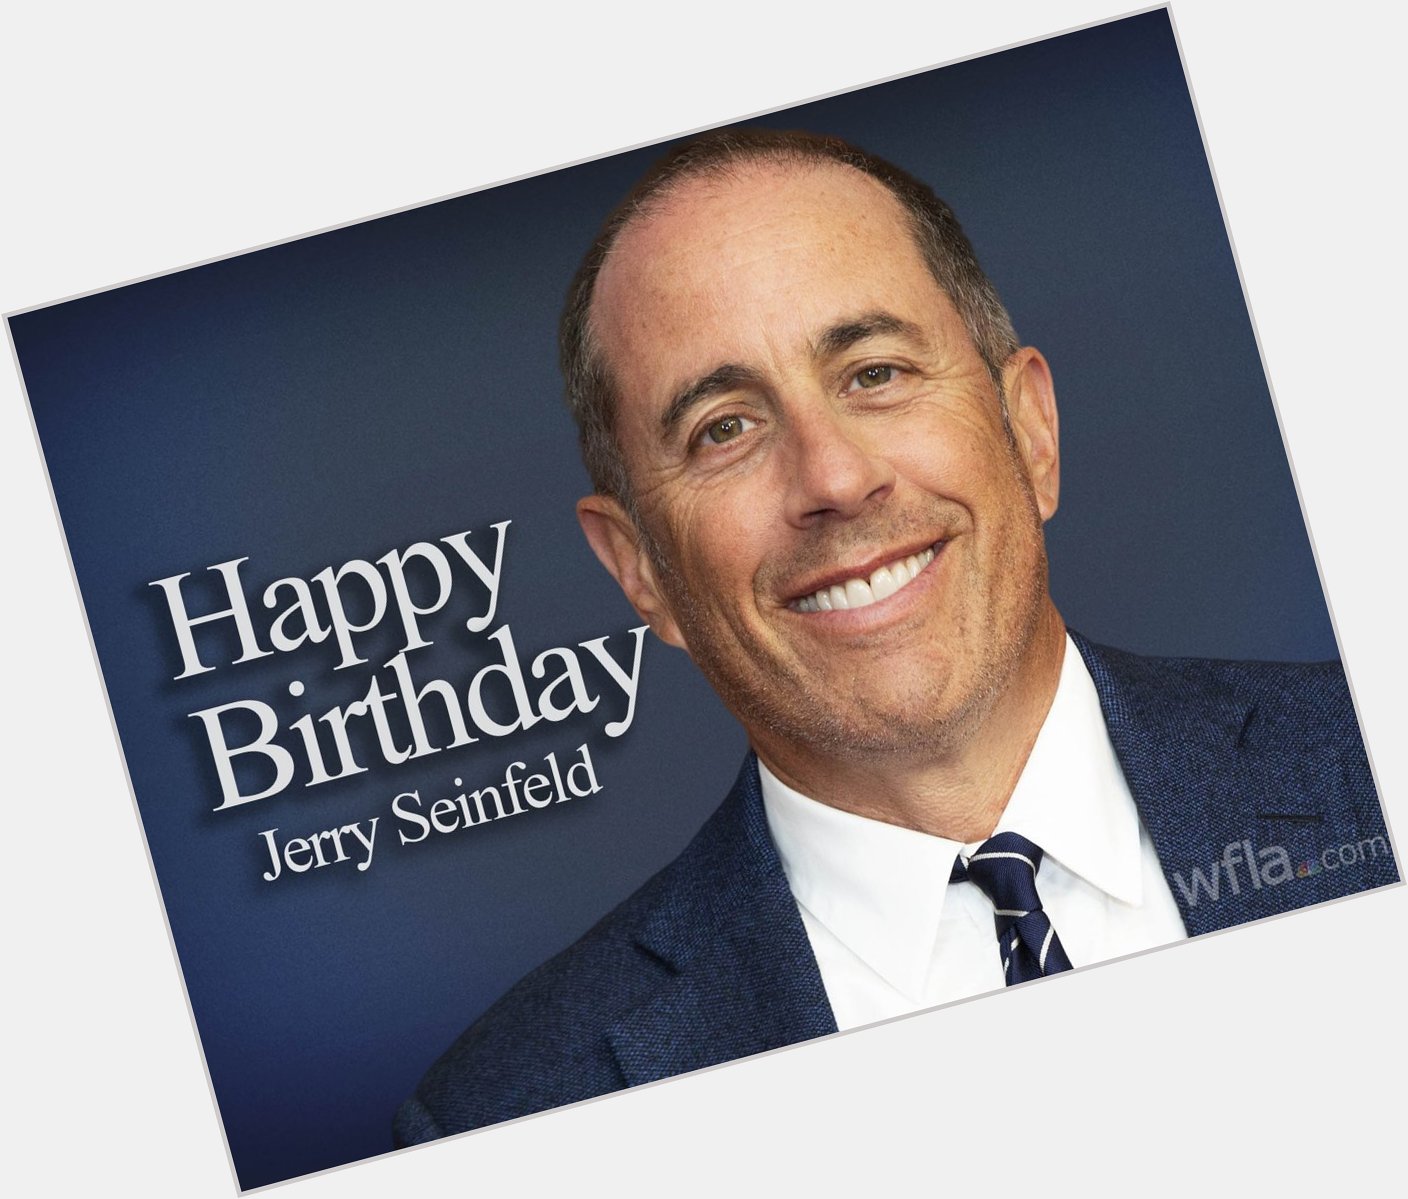 Join us in wishing a happy 68th birthday to comedian Jerry Seinfeld!  